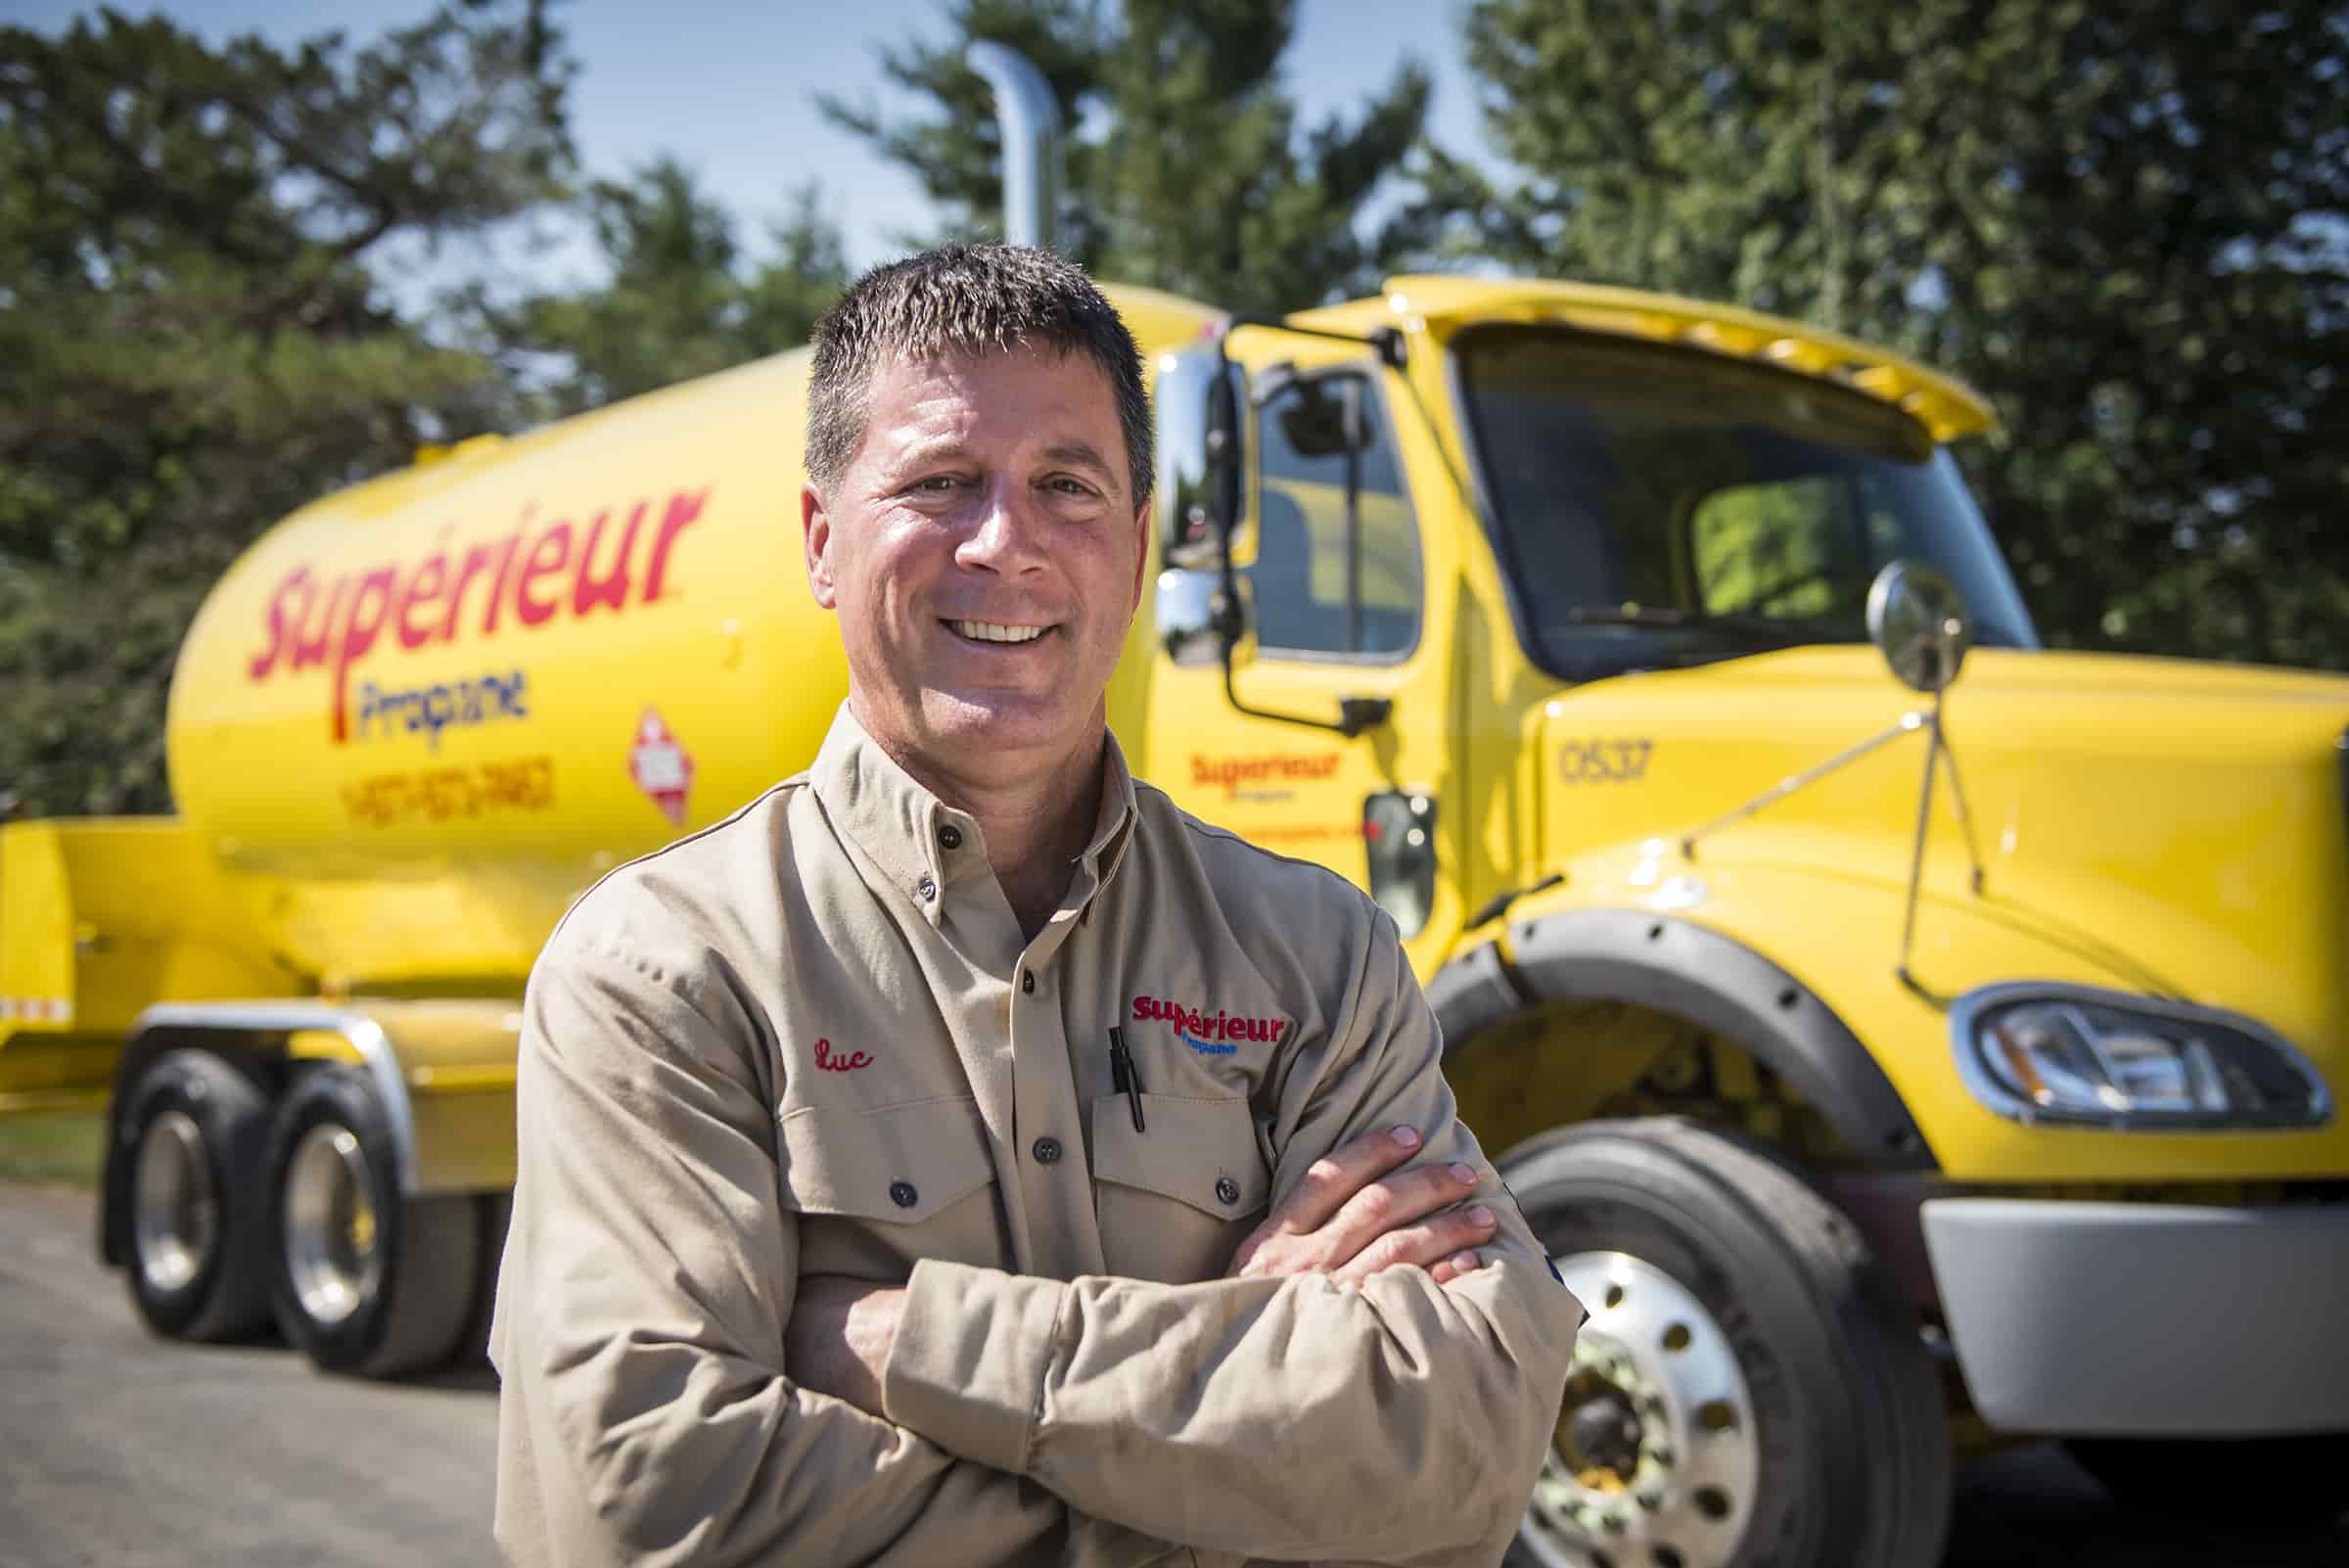 Cheerful Superior Propane driver stands in front of yellow truck.